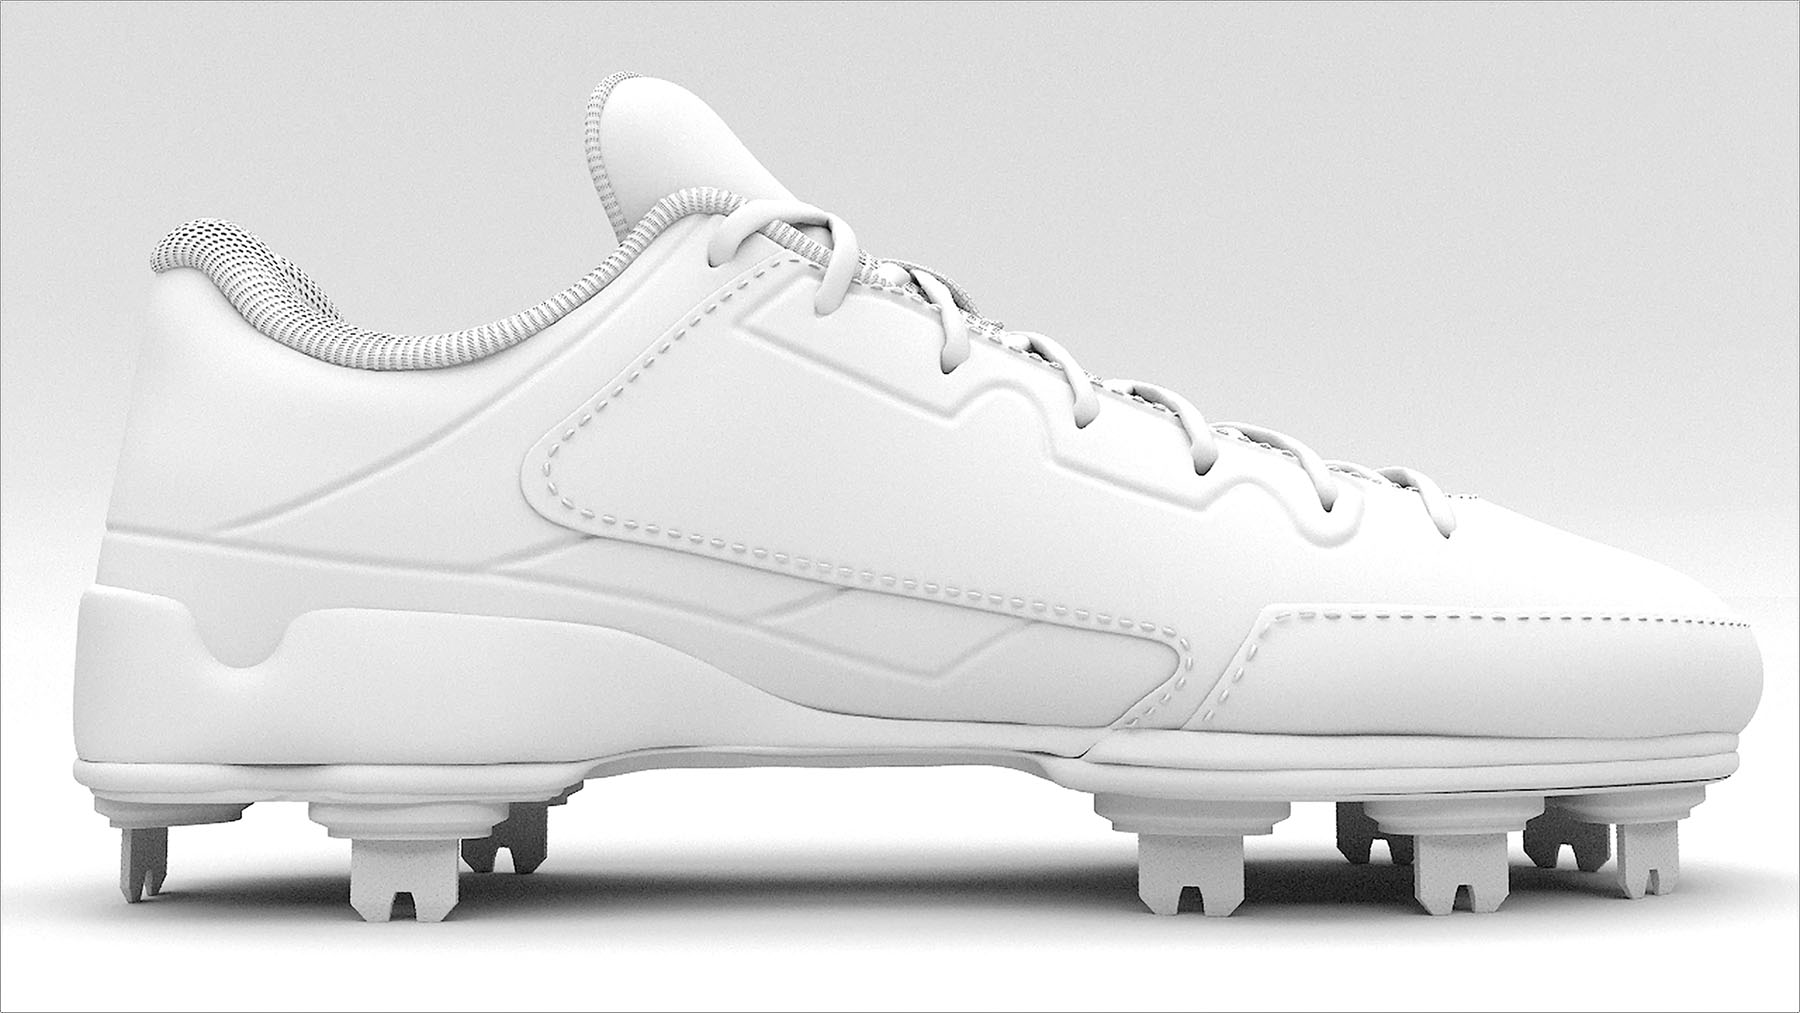 Cleats_GreyScale_small.jpg